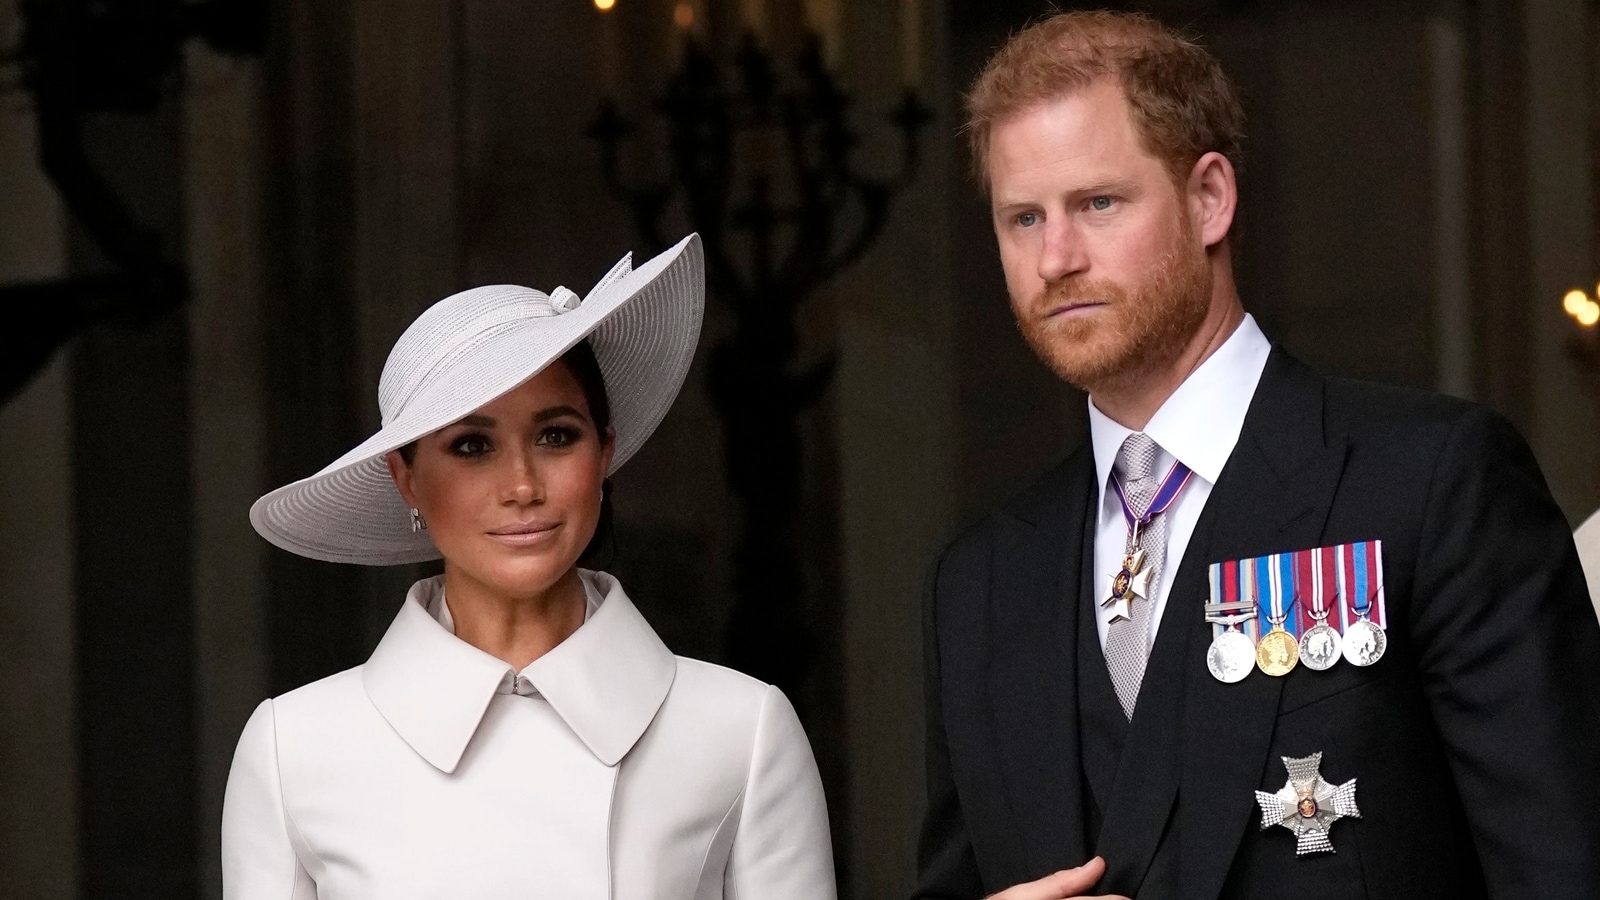 When Prince Harry ‘snapped’ at Meghan Markle in heated fight: ‘I became touchy and angry, maybe the wine…’